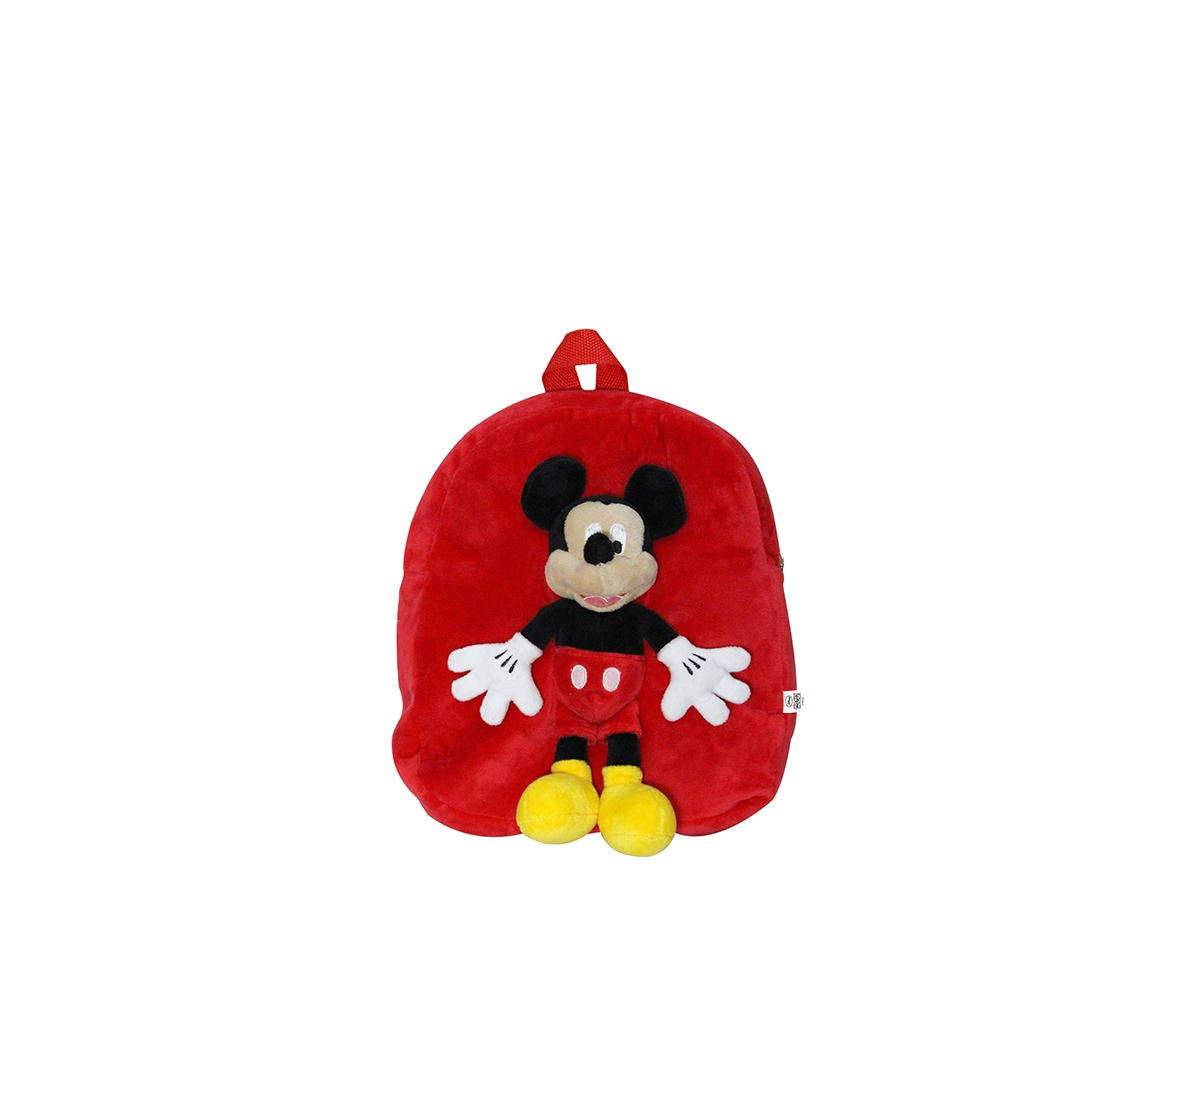 DISNEY | Disney Happiness Unisex Minnie Backpack_Pink_Free Size Plush Accessories for Kids age 12M+ - 30.48 Cm  0